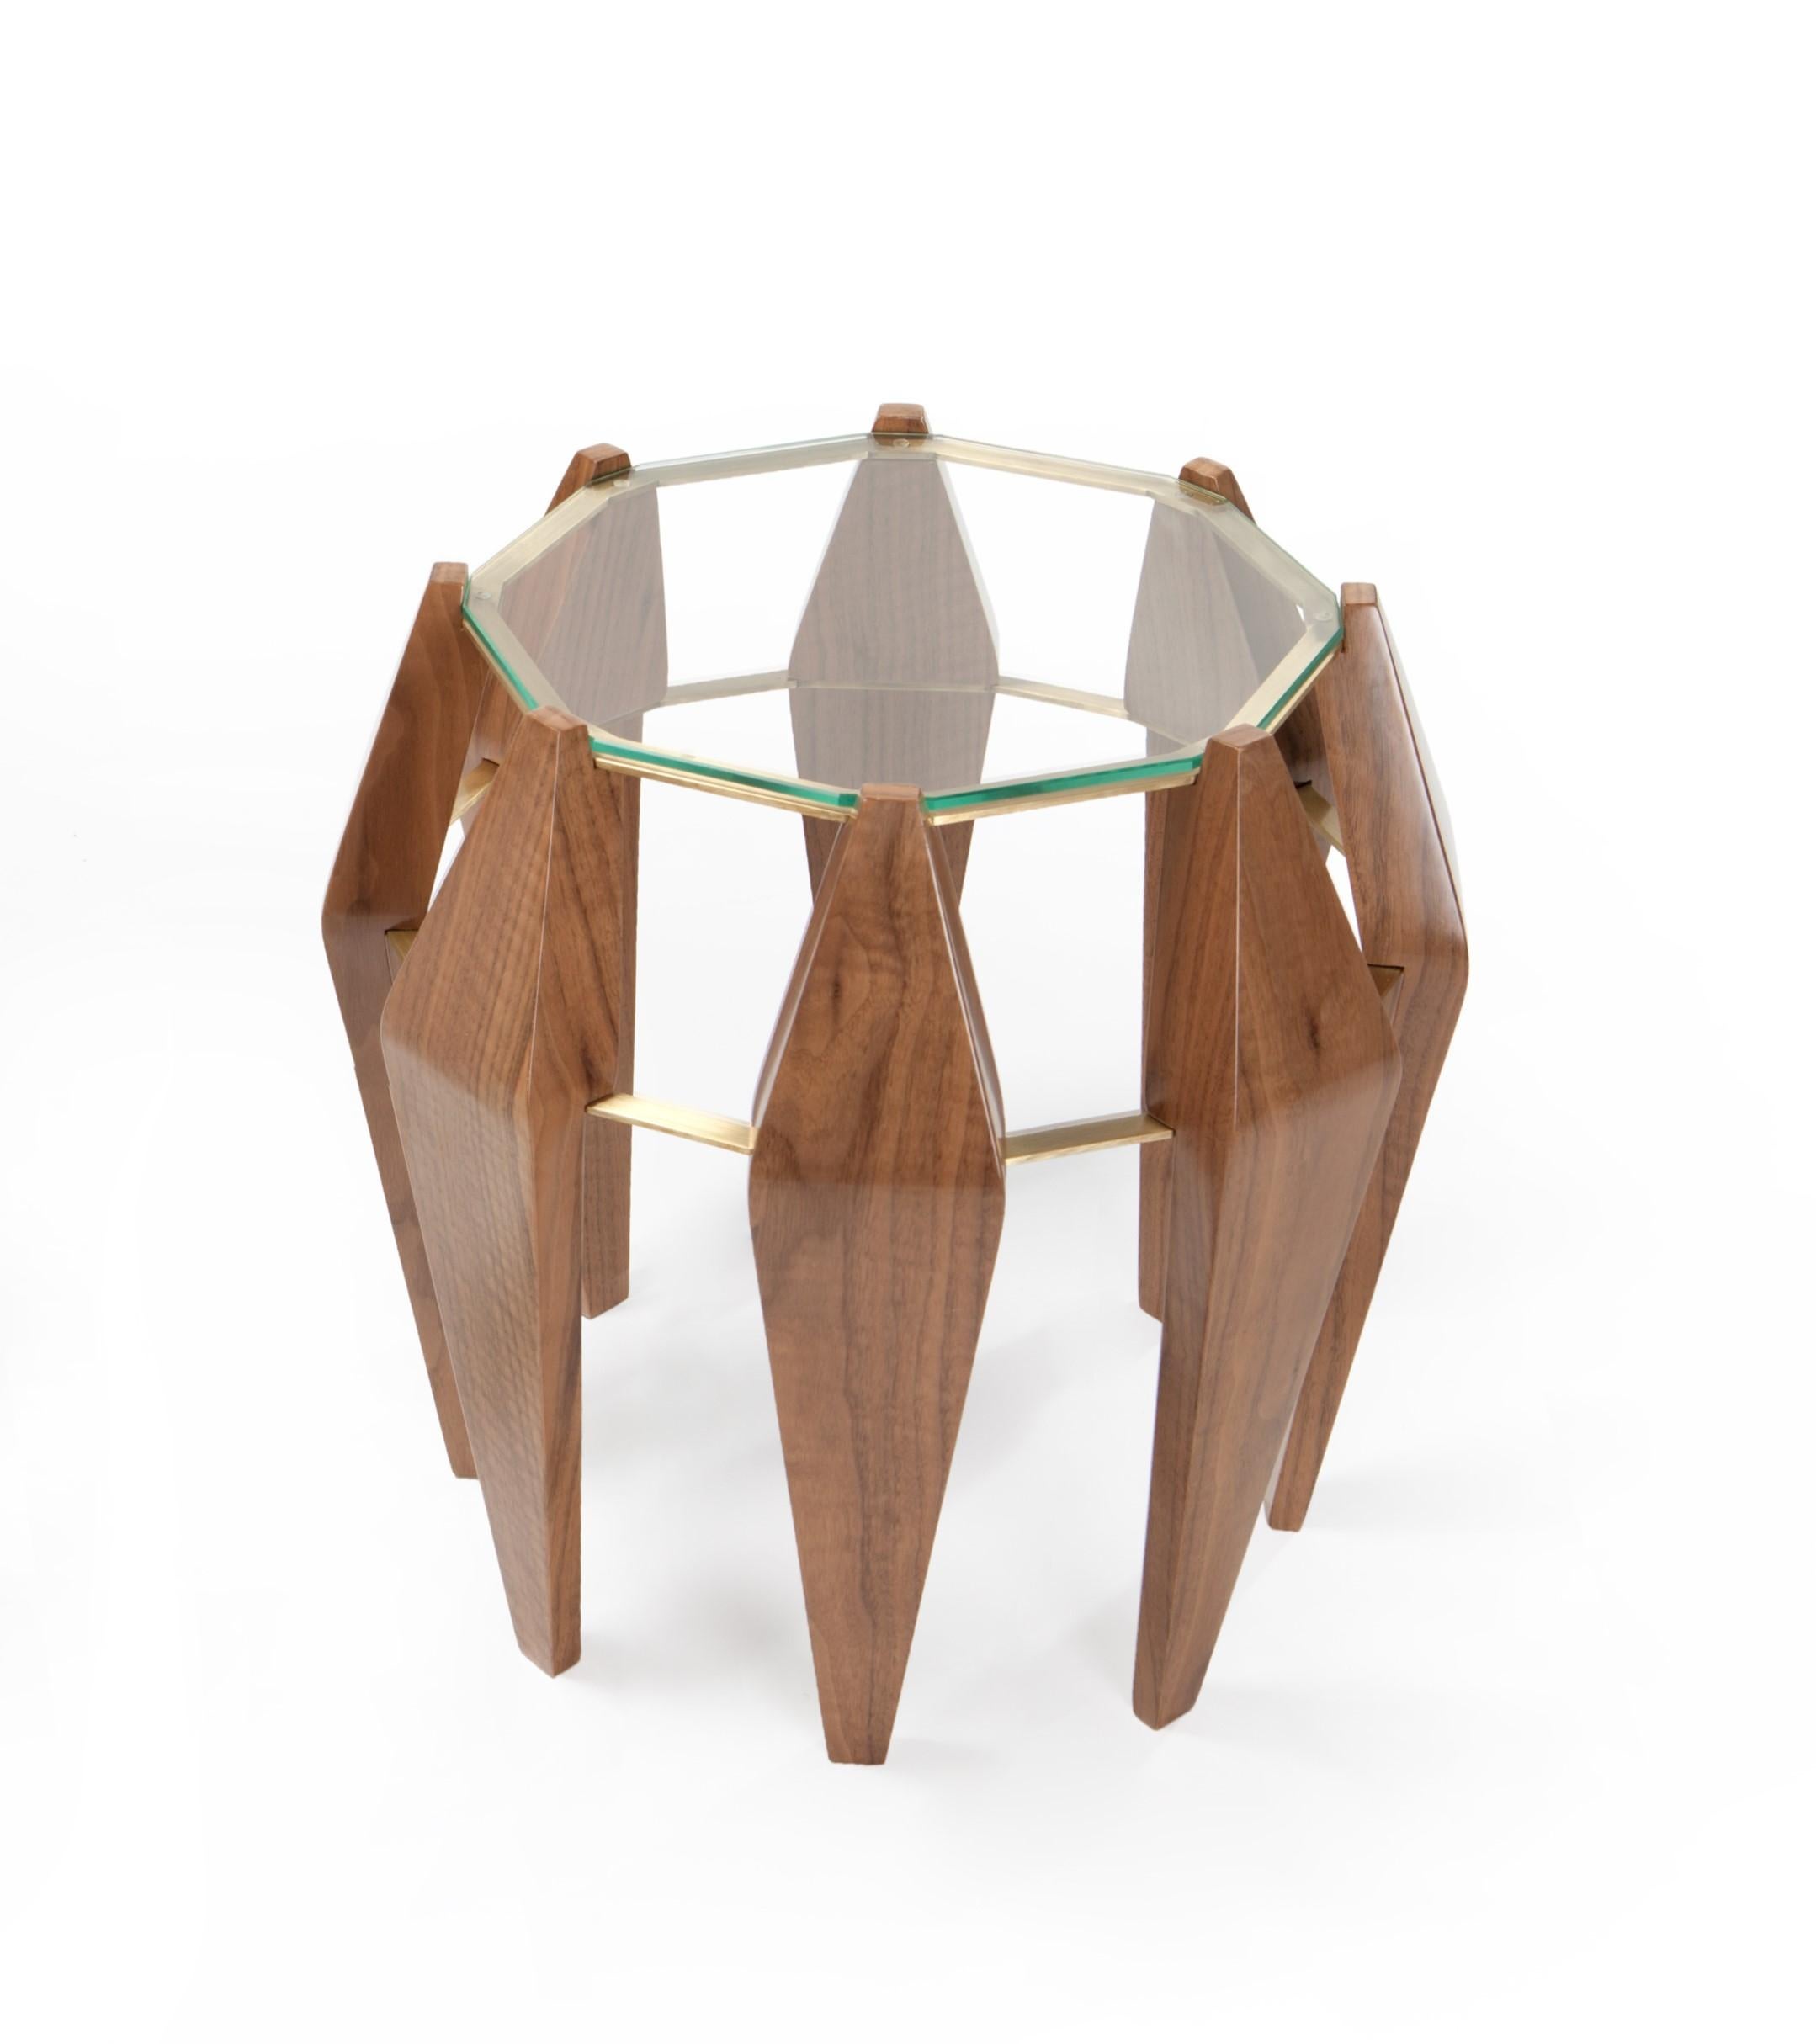 Medium Na Pali Walnut Side Table by InsidherLand
Dimensions: D 50 x W 50 x H 50 cm.
Materials: wood structure finished in walnut veneer in half gloss varnish, oxidized brushed brass, glass.
7 kg.
Also available in white lacquered.

Numerous sculpted